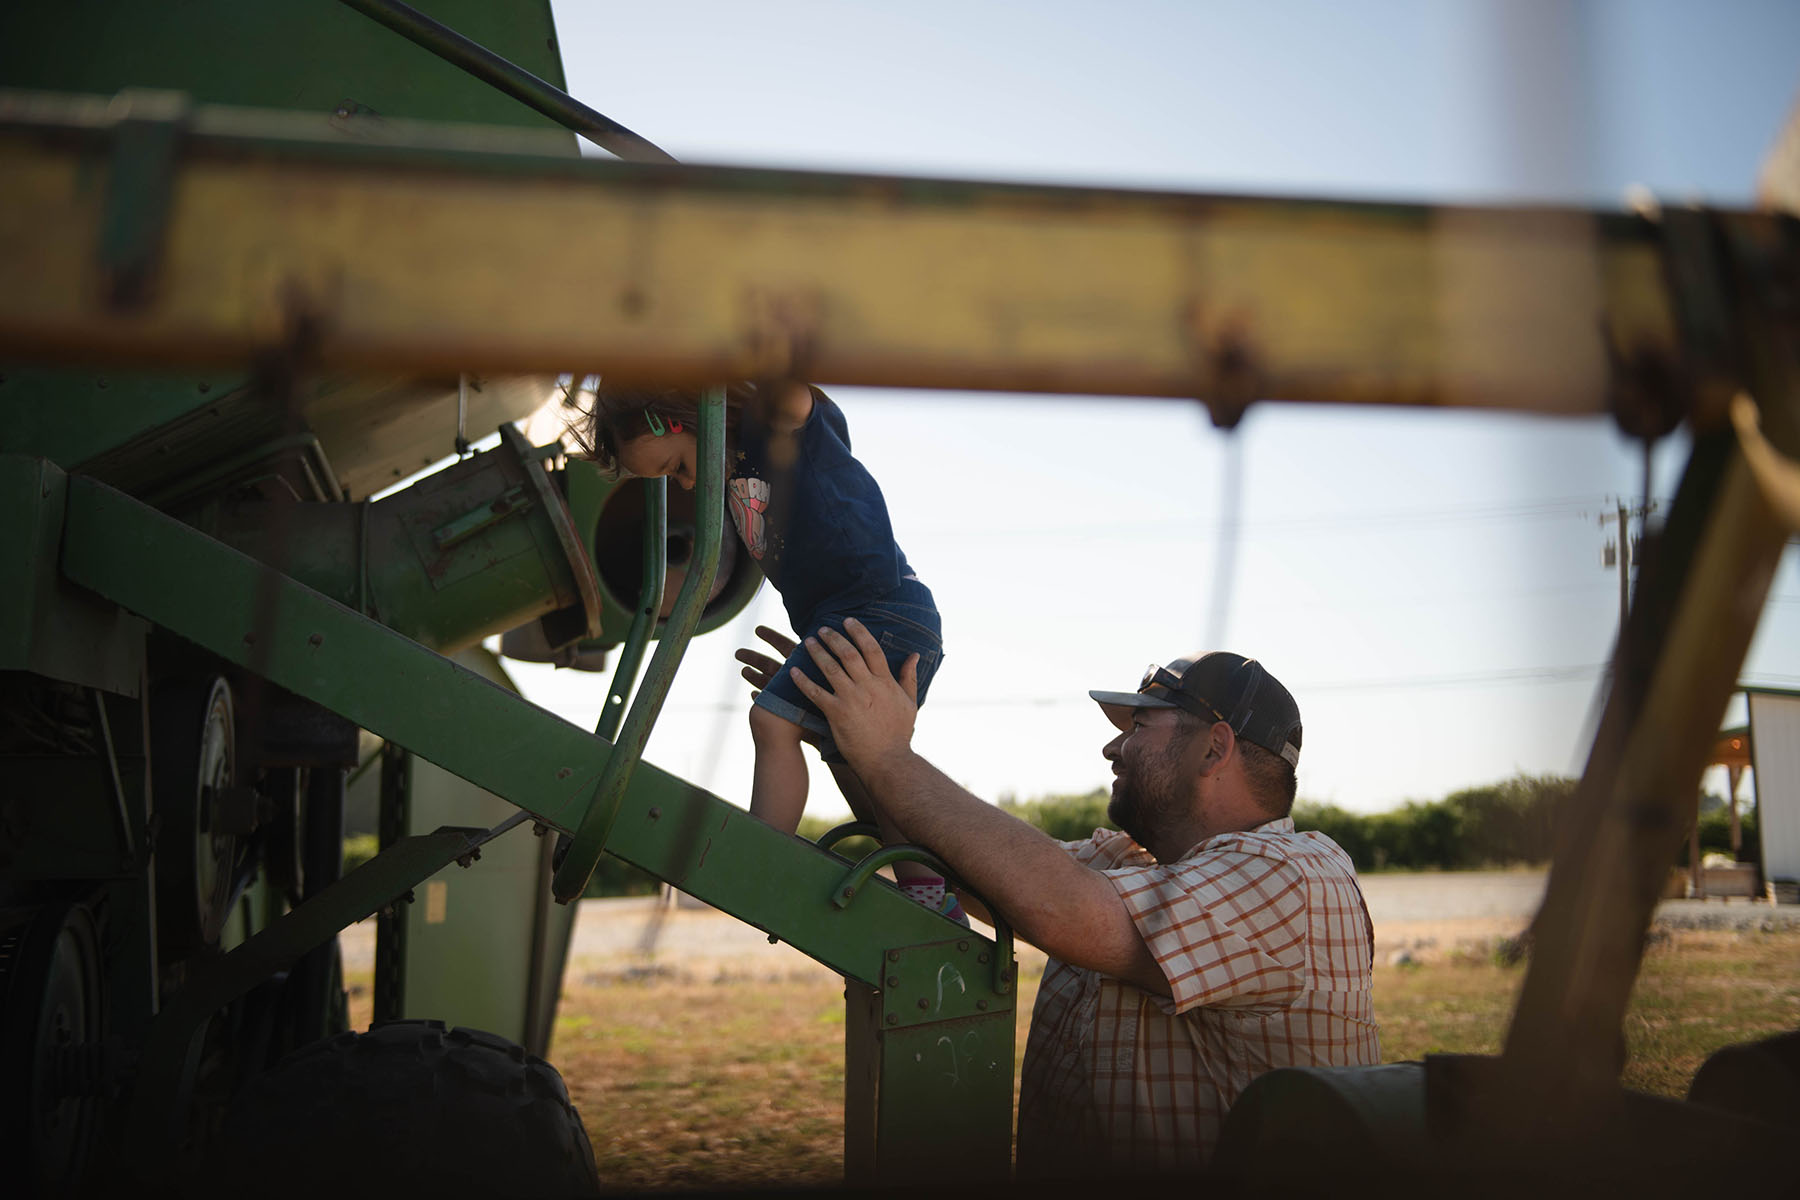 Jacob Slosberg plays with daughter Ayla on a tractor.